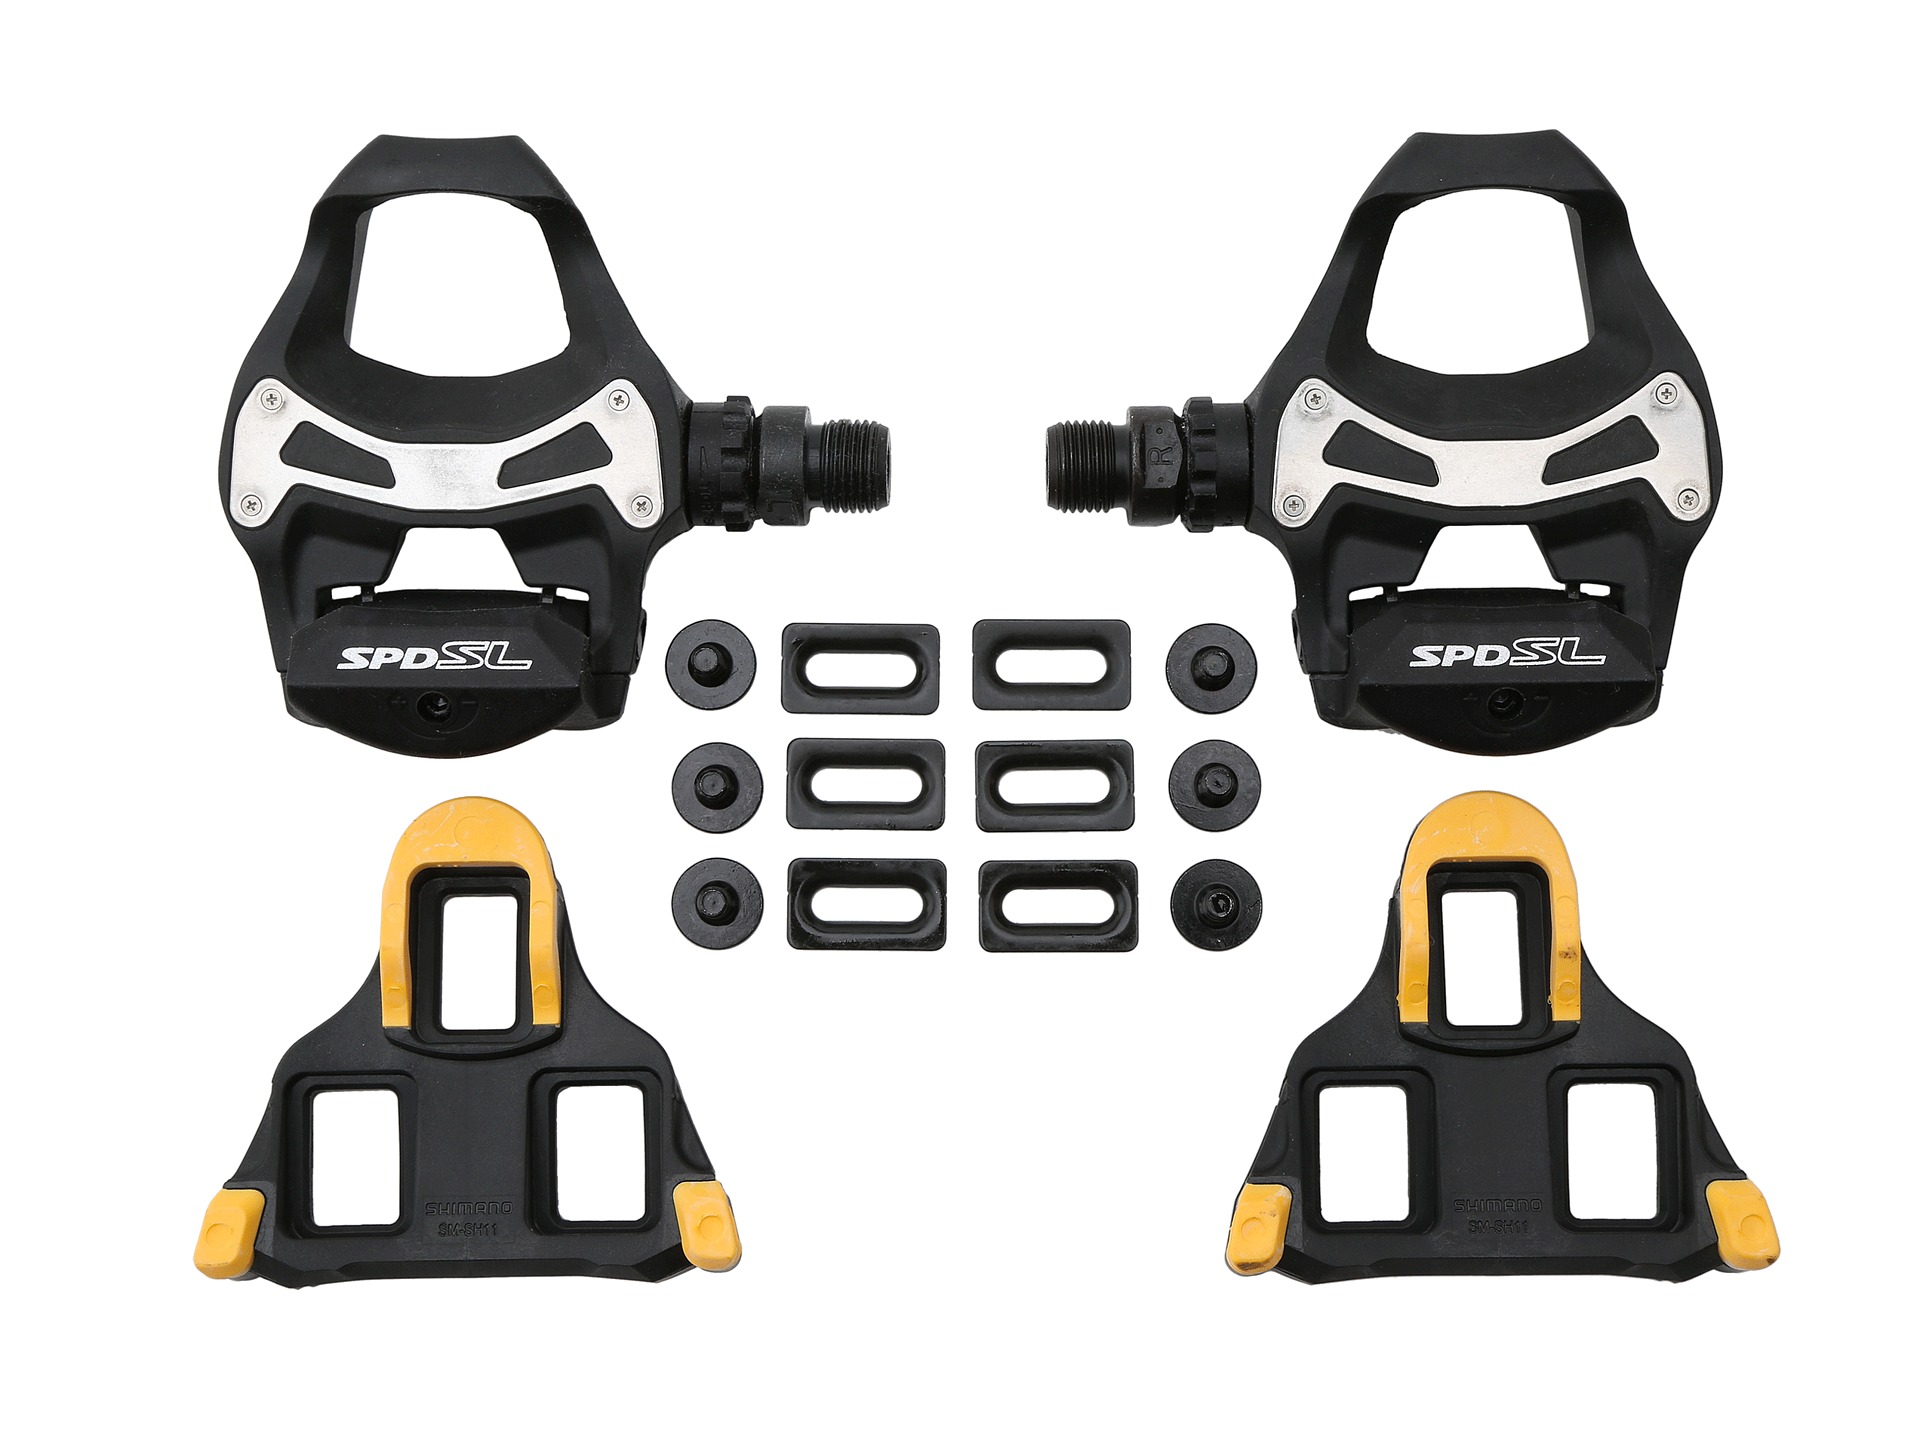 Pedal Road Shimano PD-R550 ( Pedals Shimano 105)